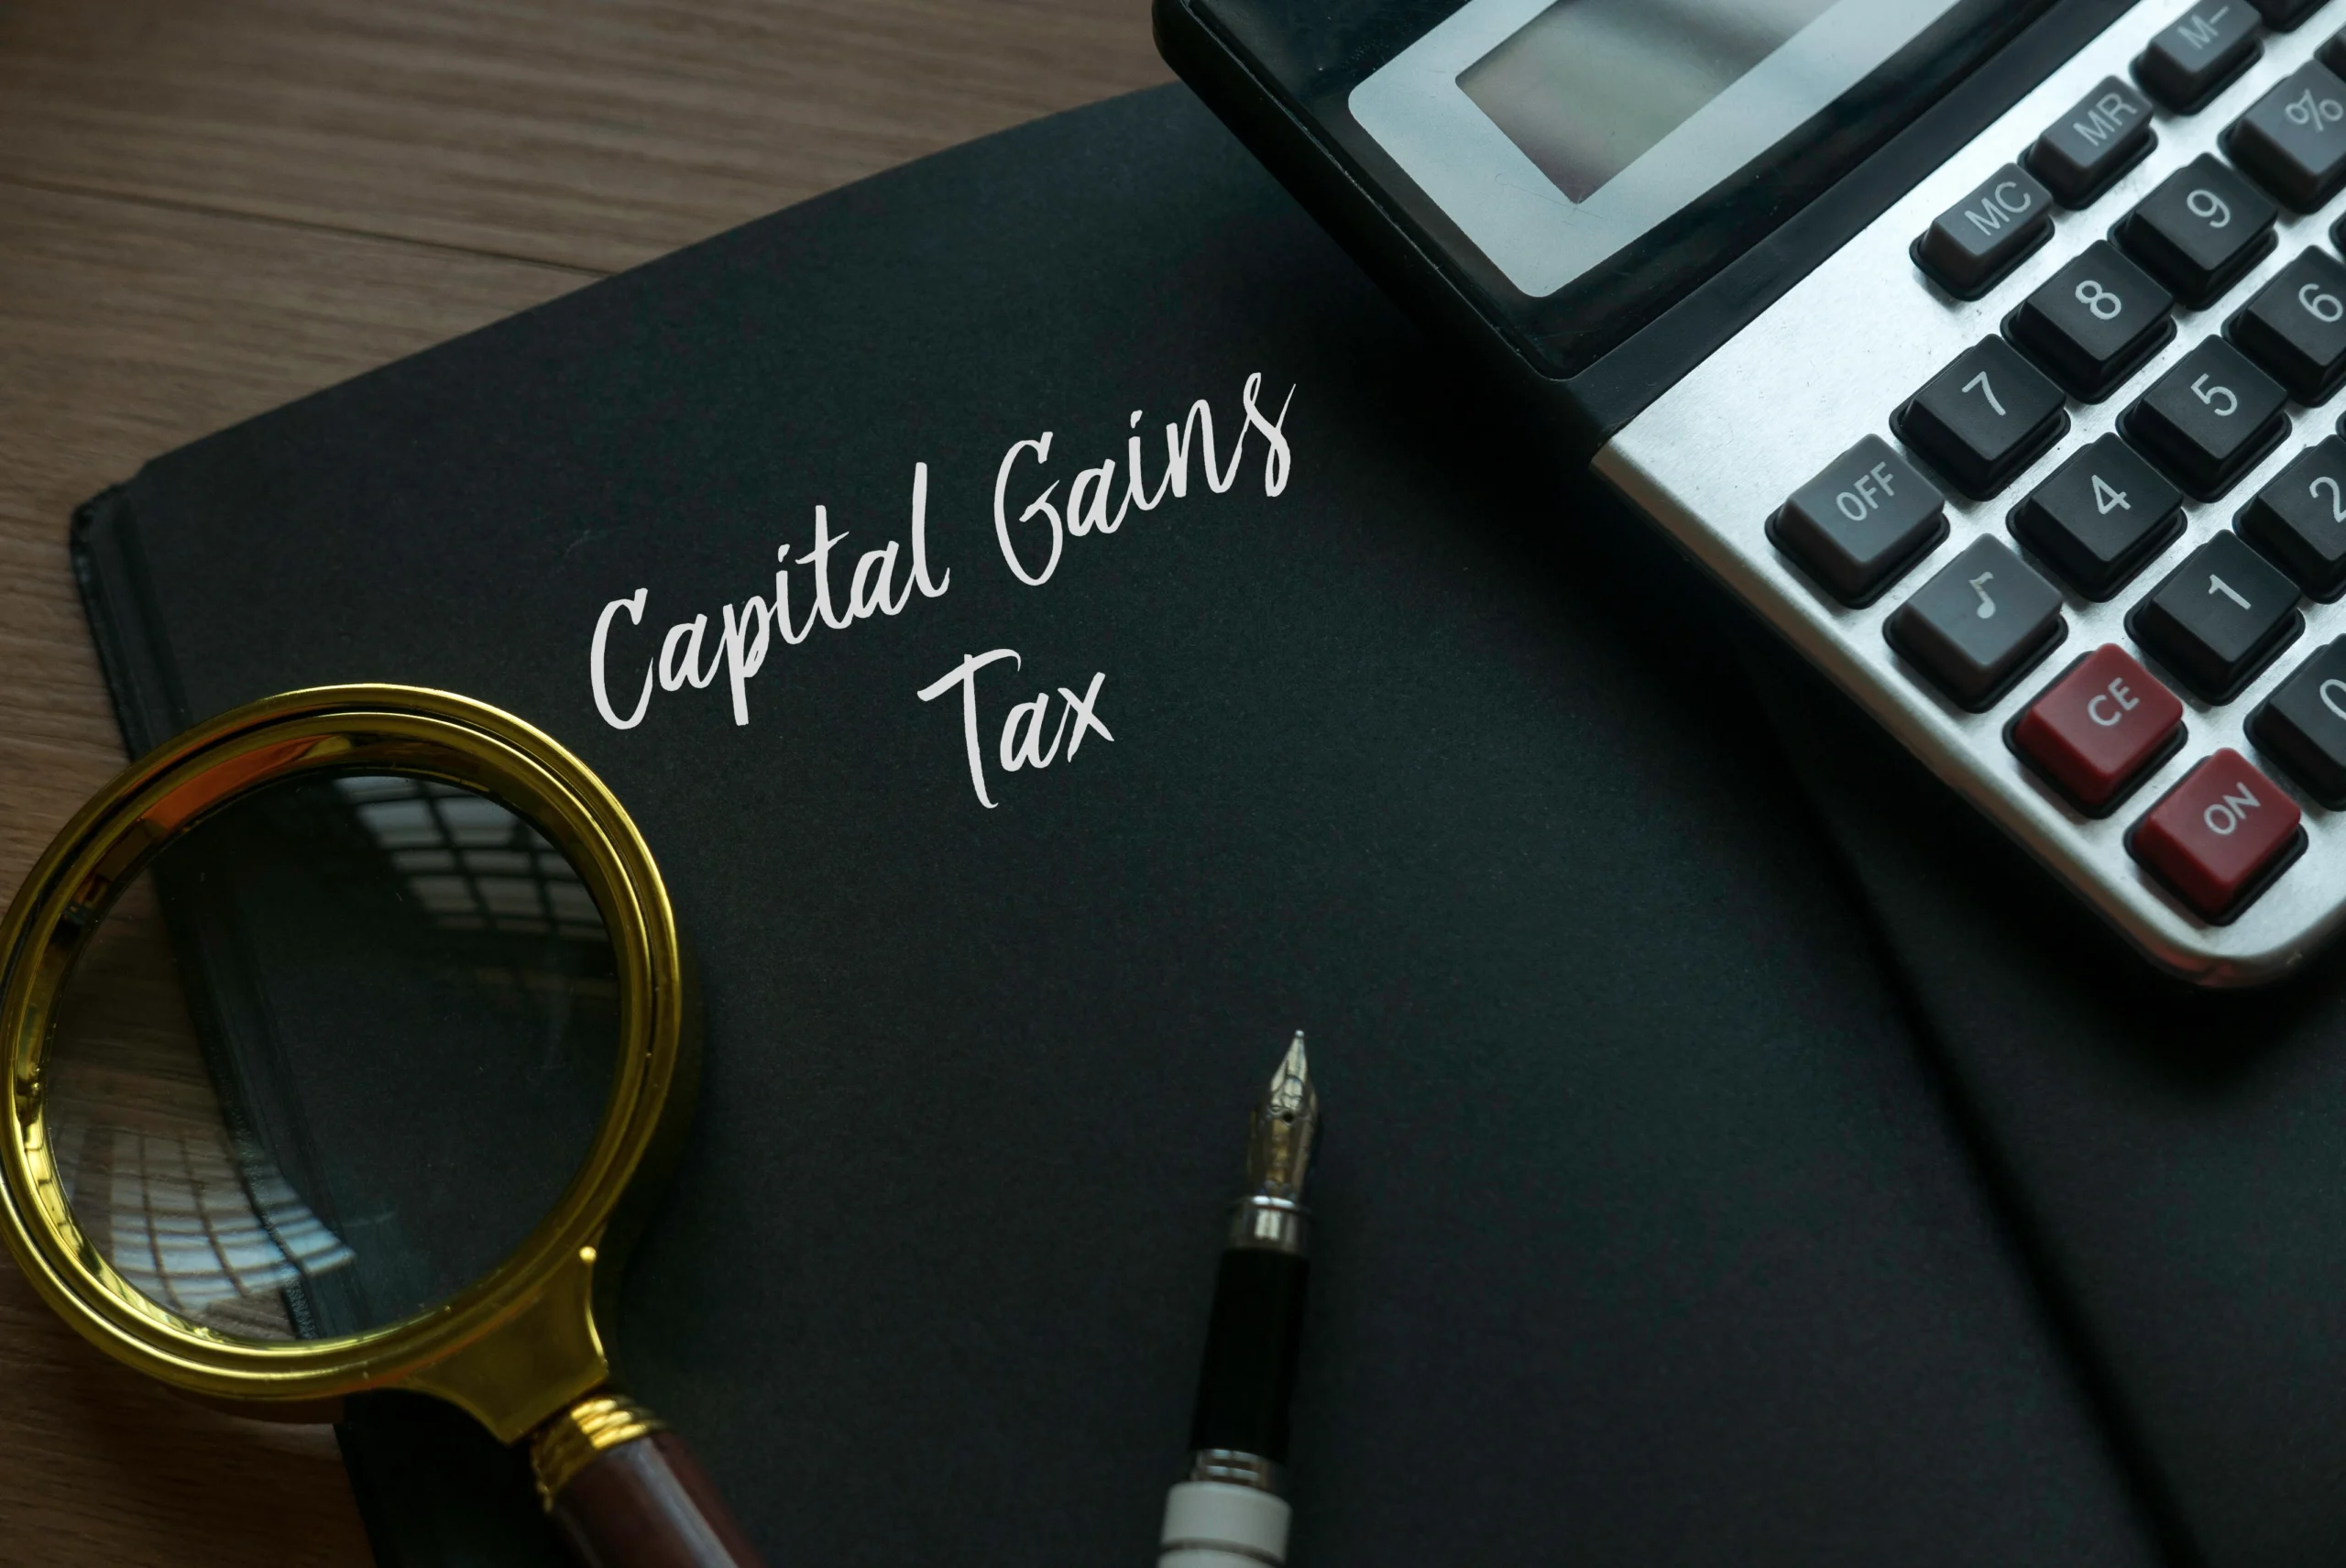 Capital Gains tax in words next to pen, calculator and magnifying glass